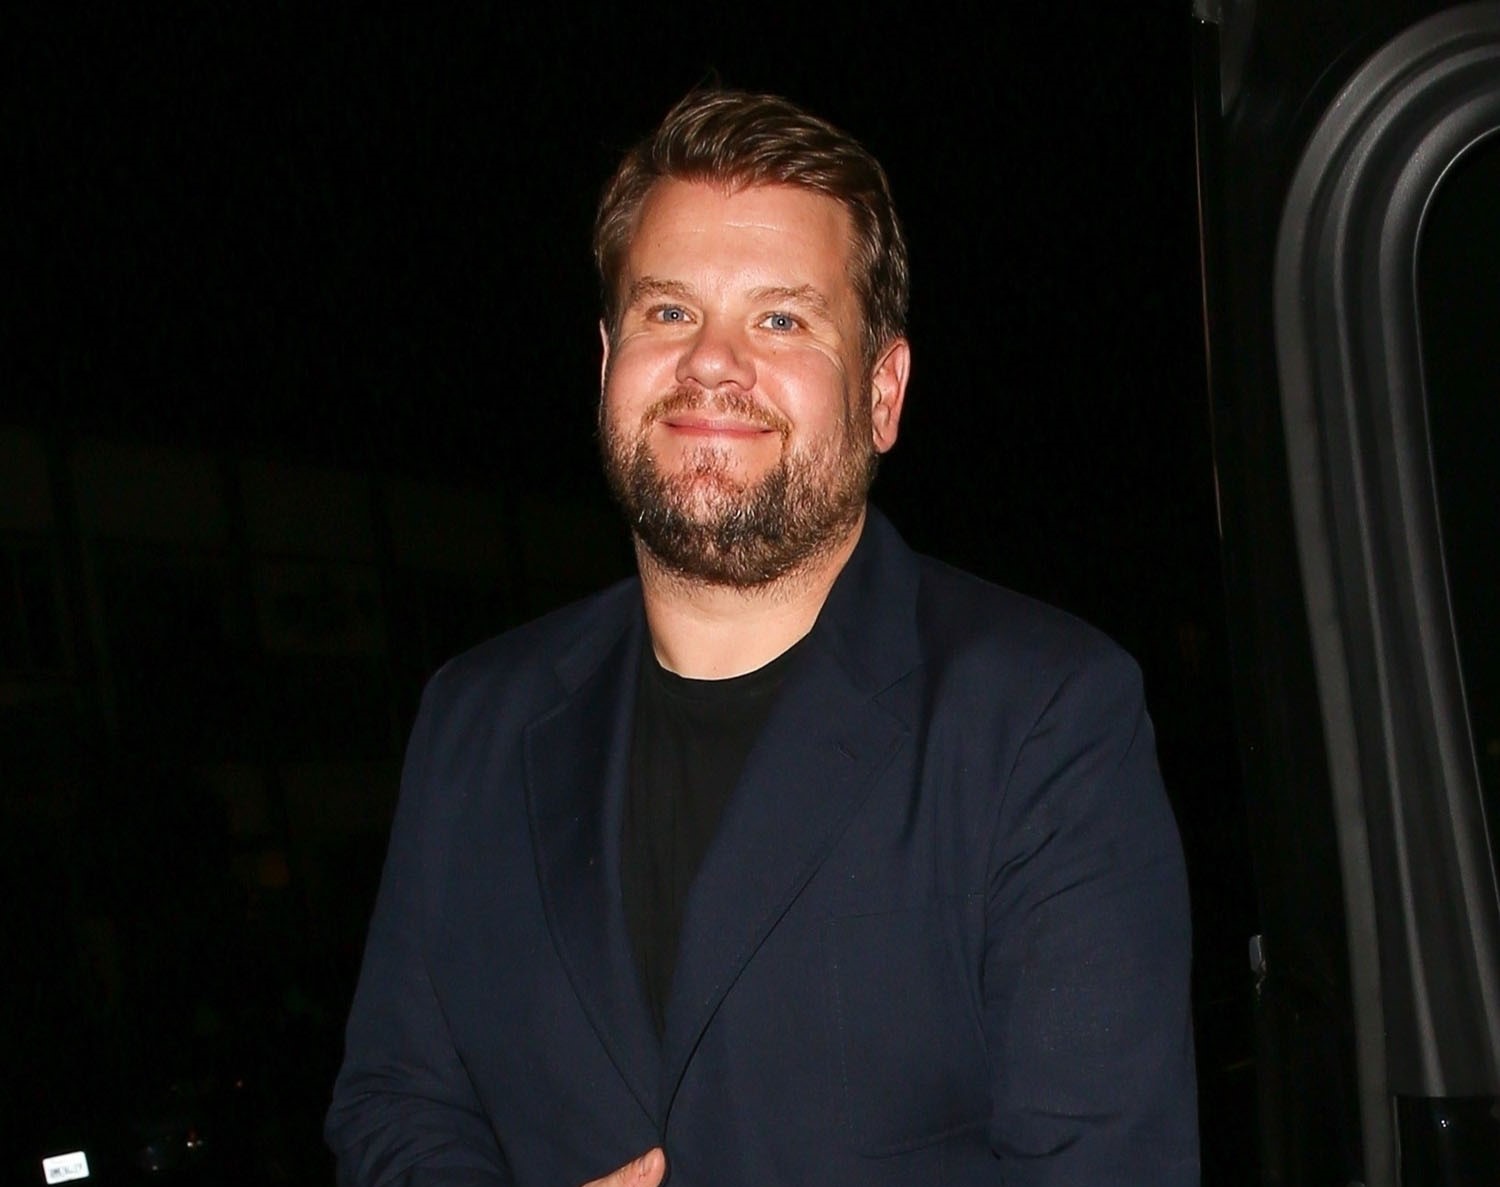 James Corden's apology wasn’t the worst we’ve ever seen